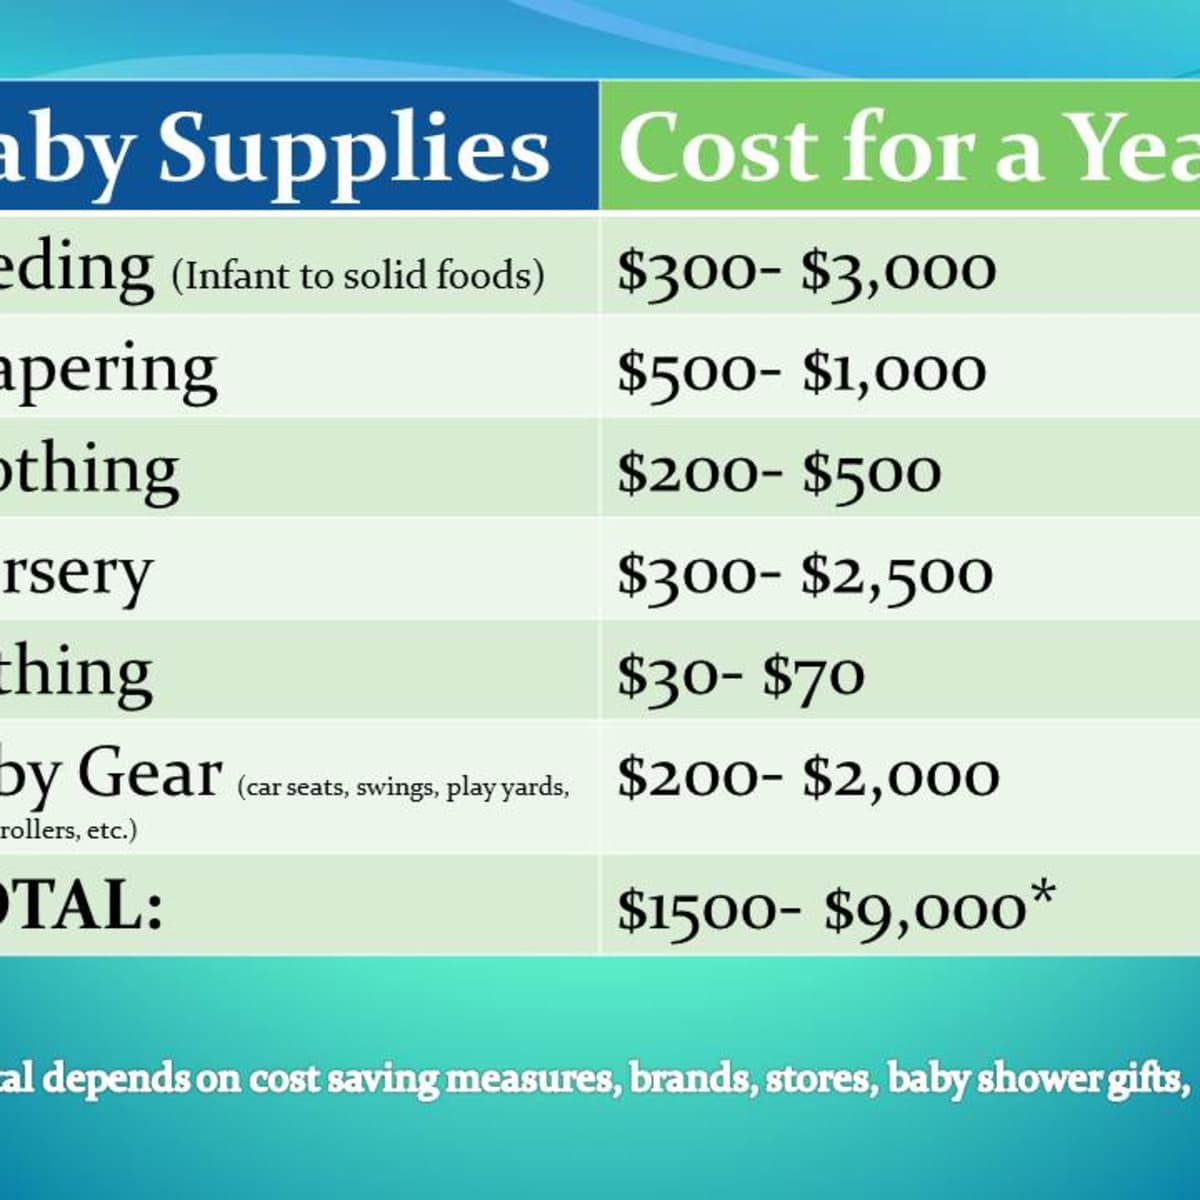 How Much Does a Baby Cost Per Month?